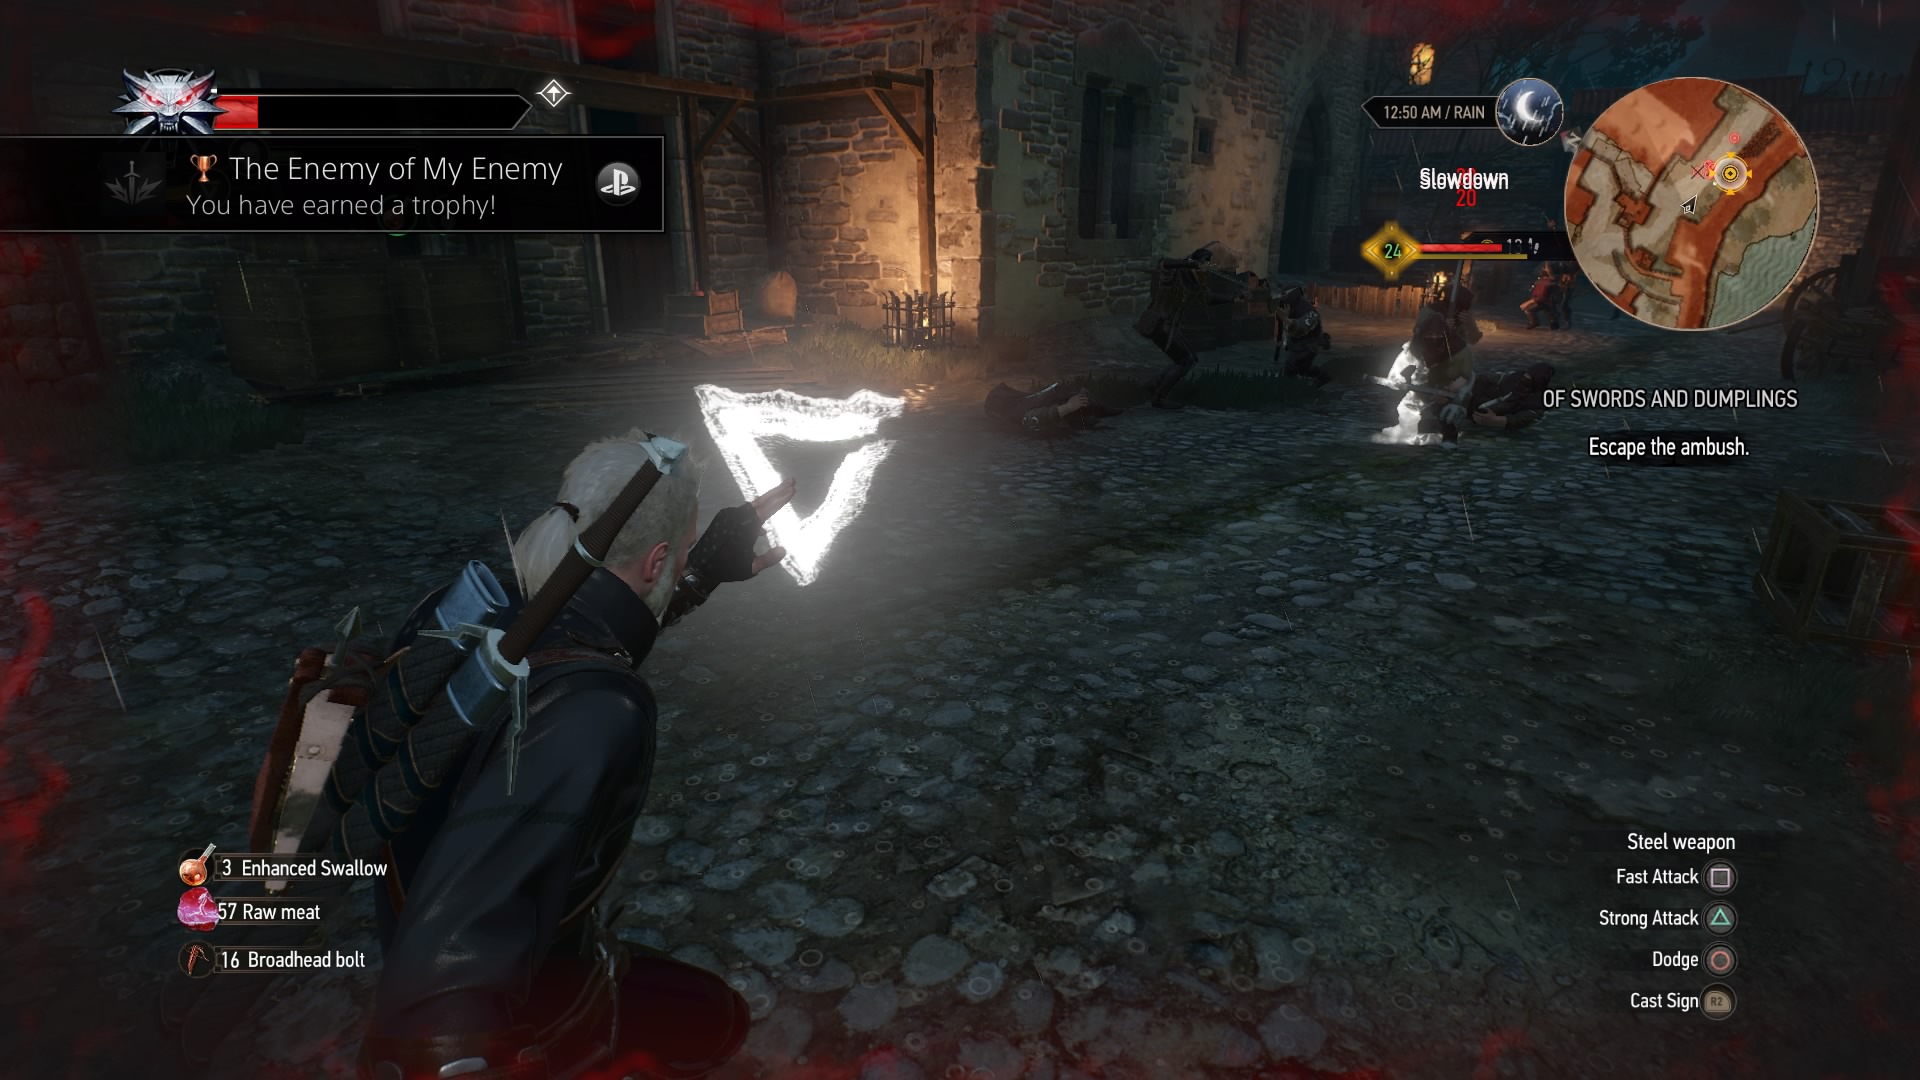 The Witcher 3: Wild Hunt
The Enemy of My Enemy(Bronze)